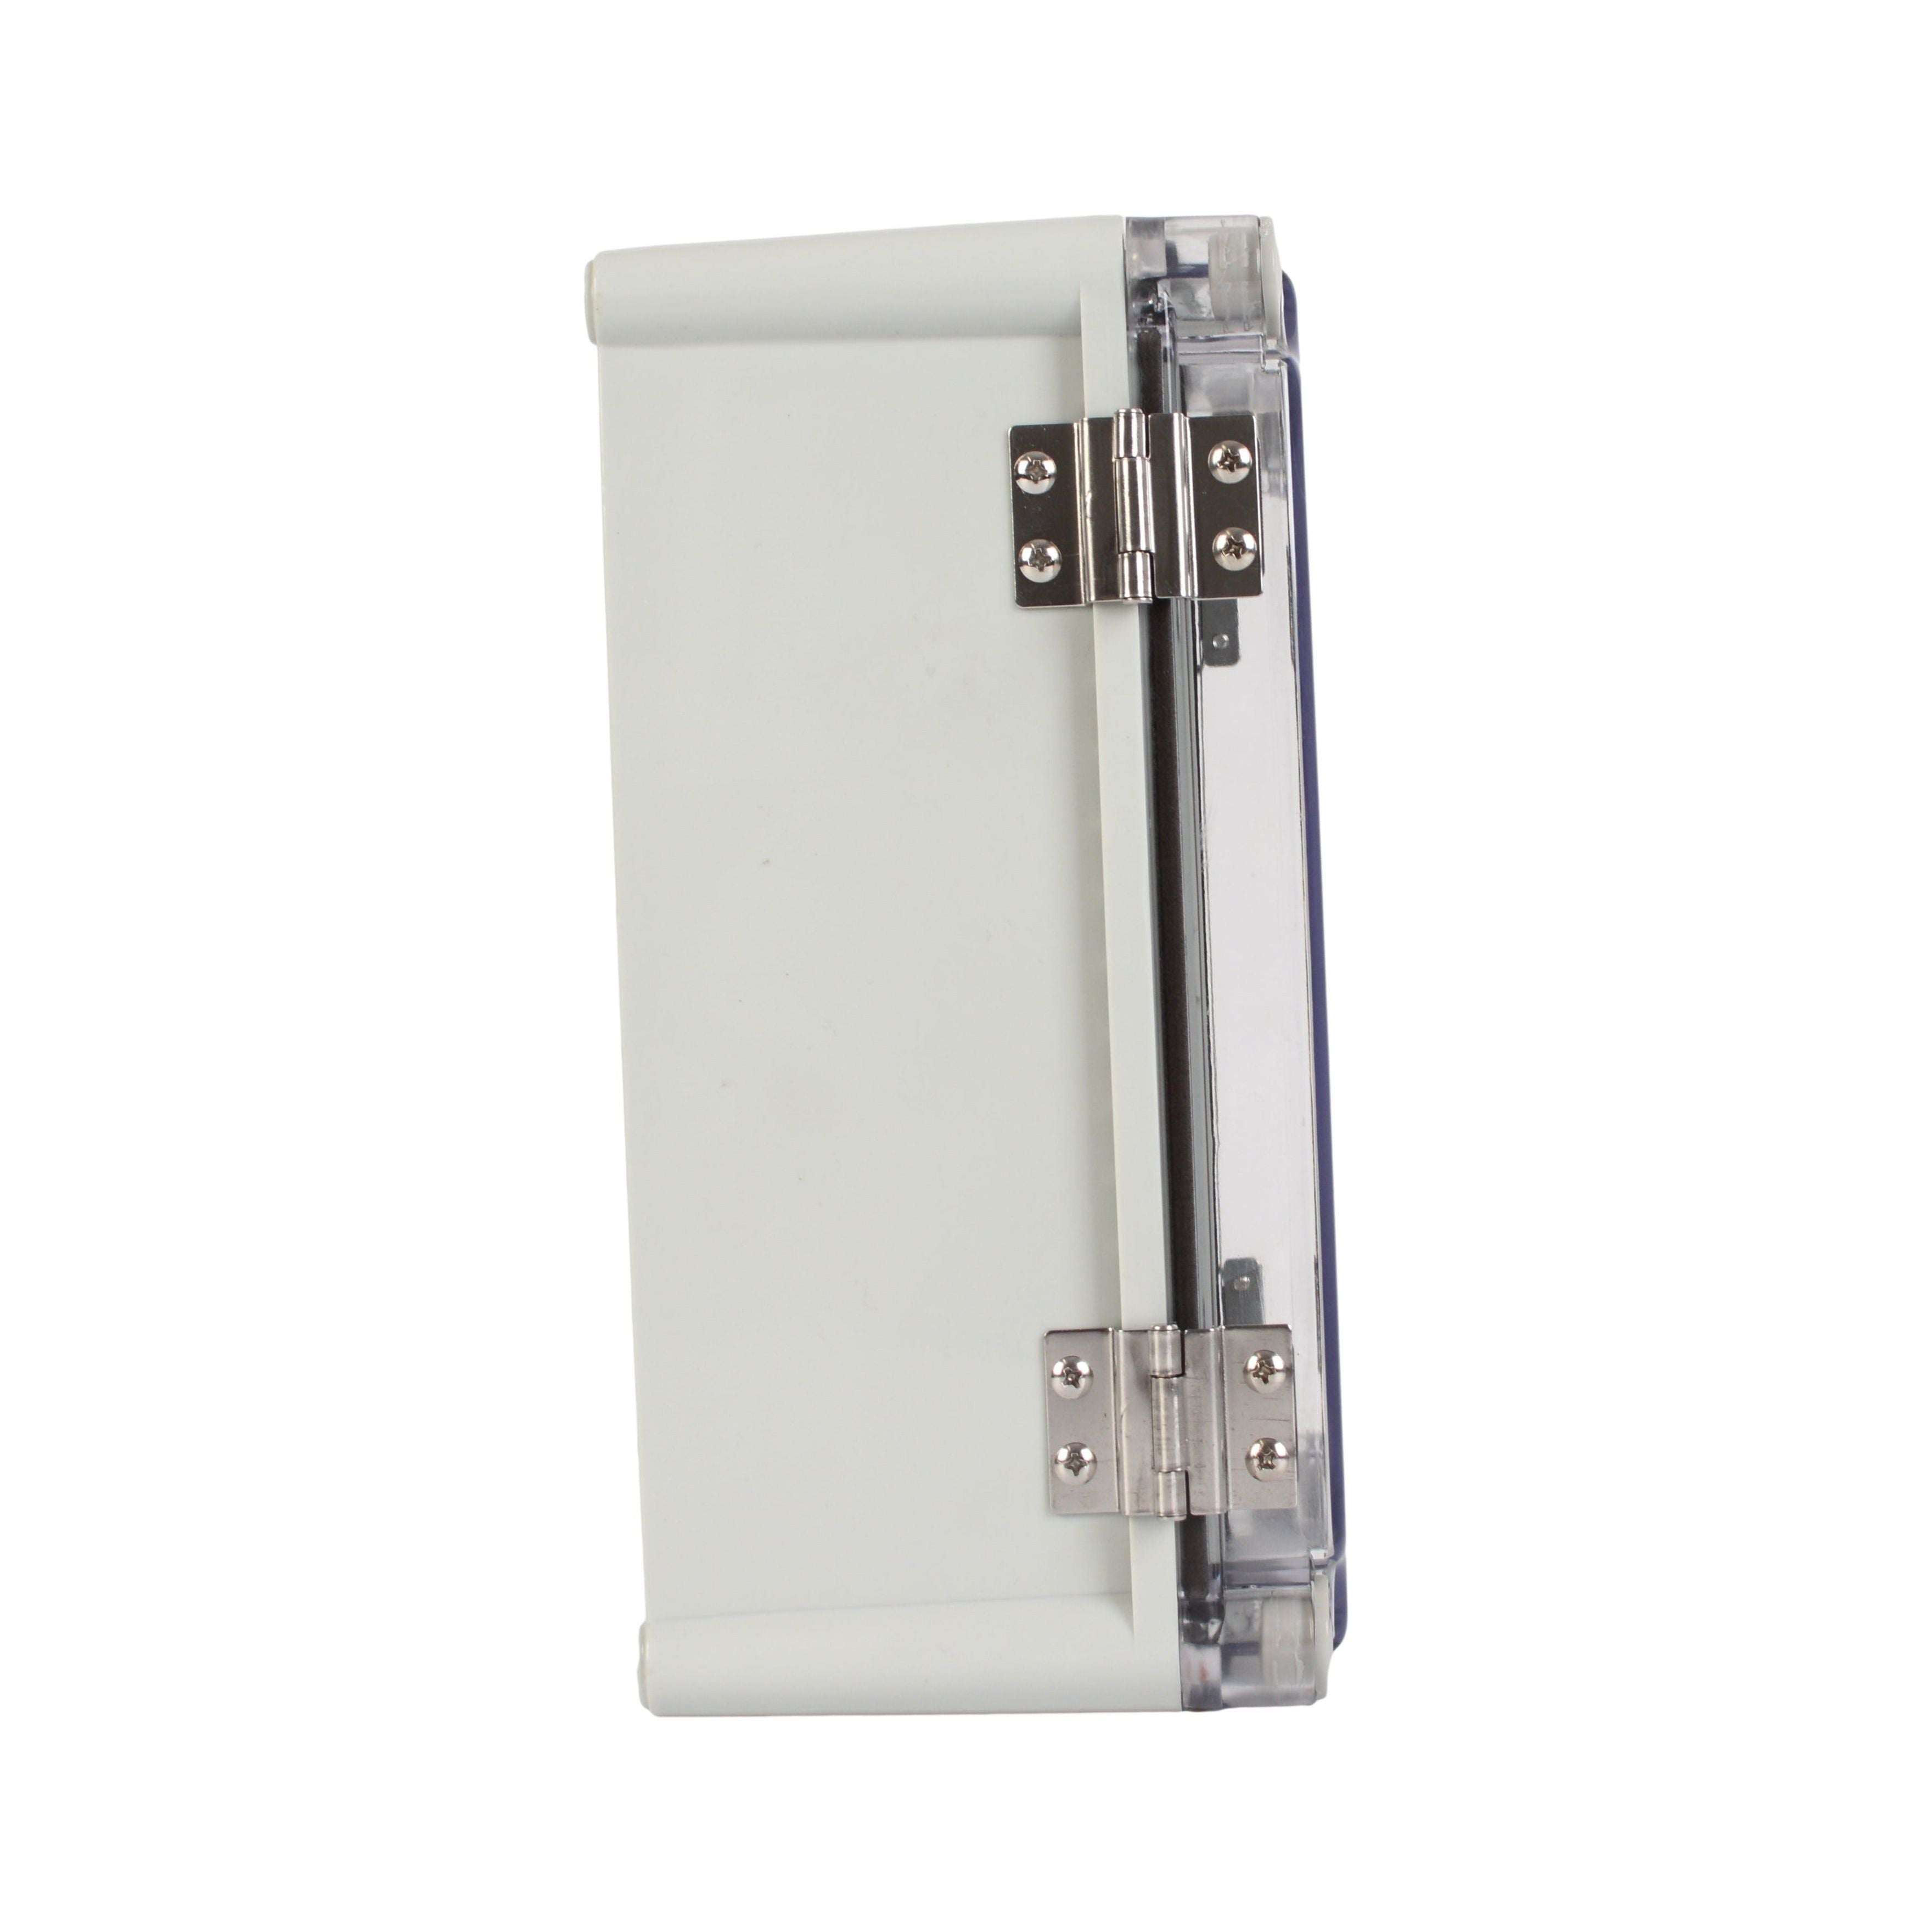 ABS IP66 Clear Lid Hinge Junction Box 280 x 280 x 130mm